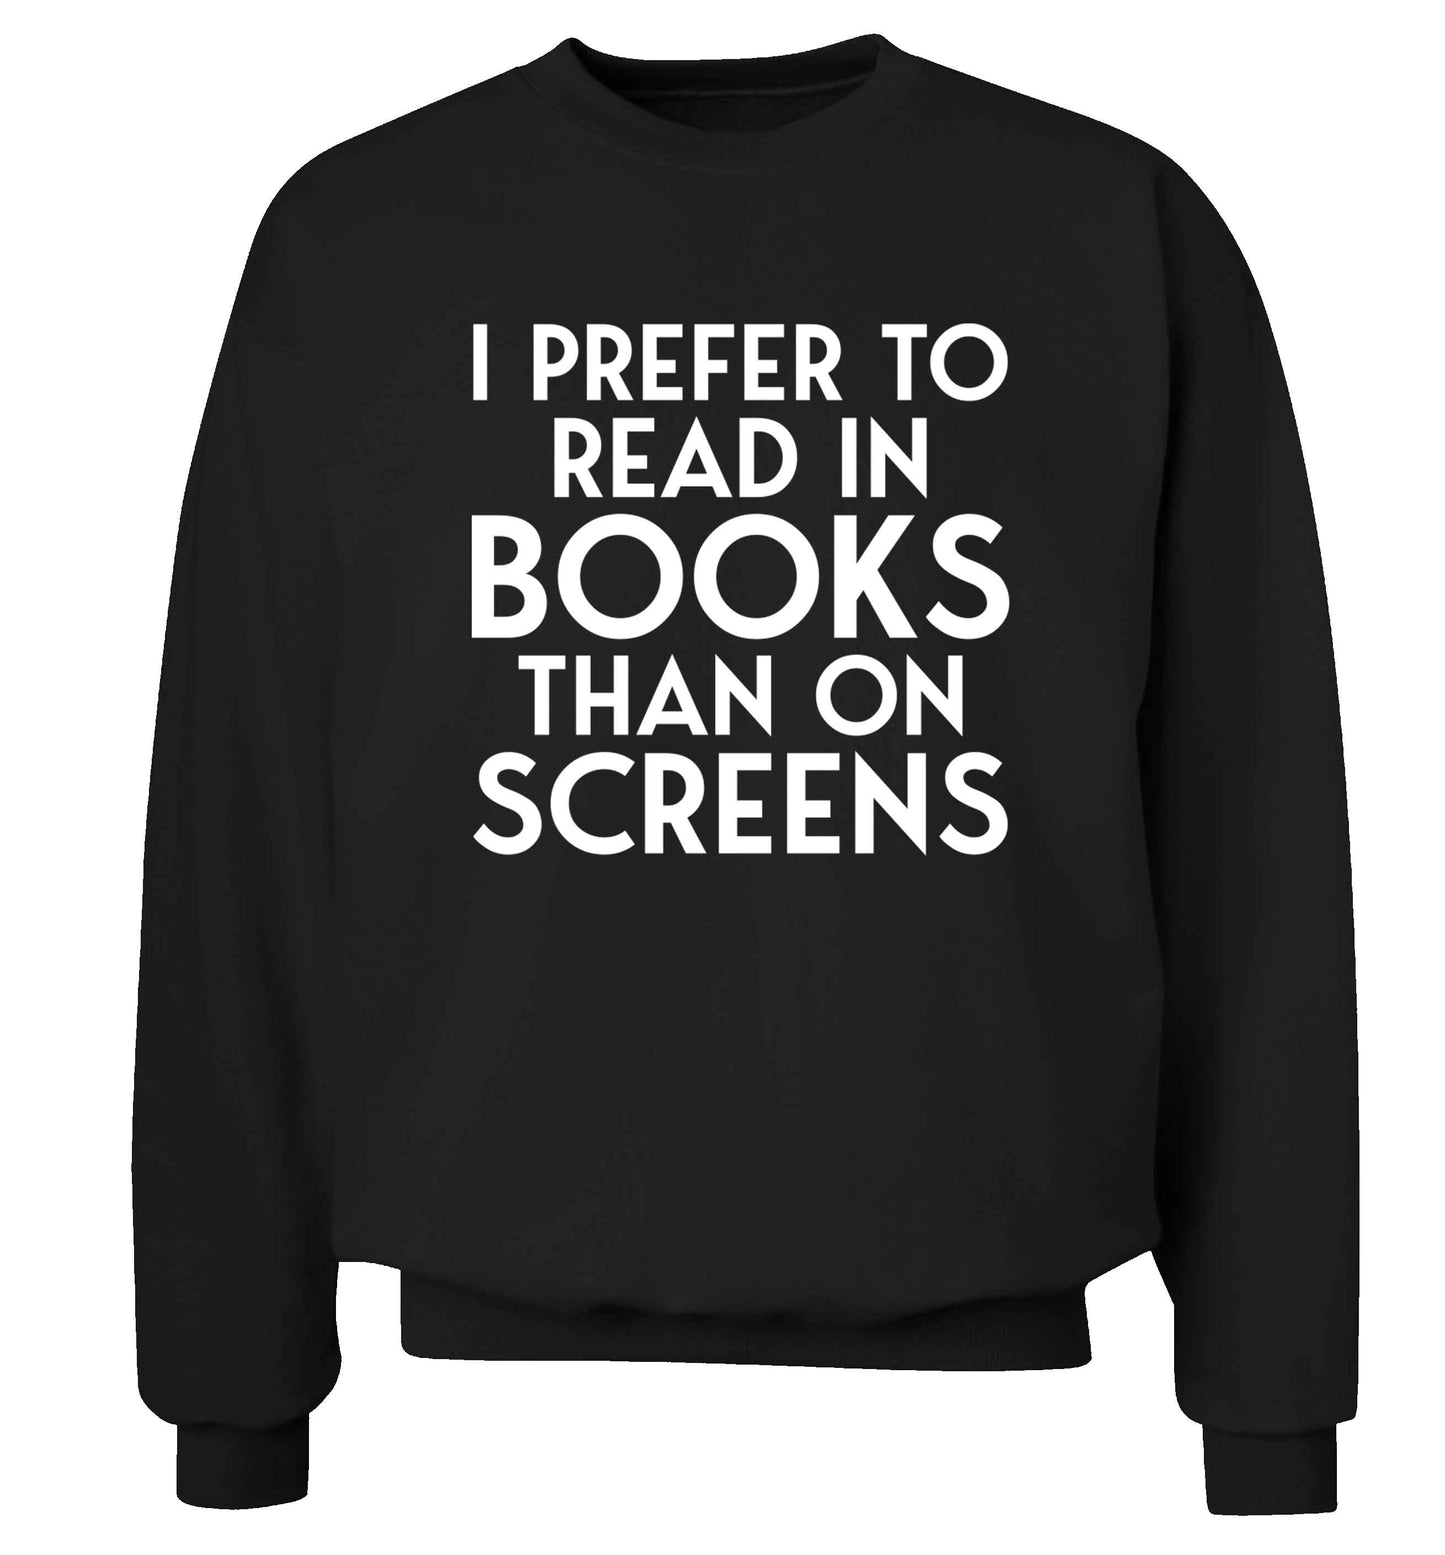 I prefer to read in books than on screens Adult's unisex black Sweater 2XL